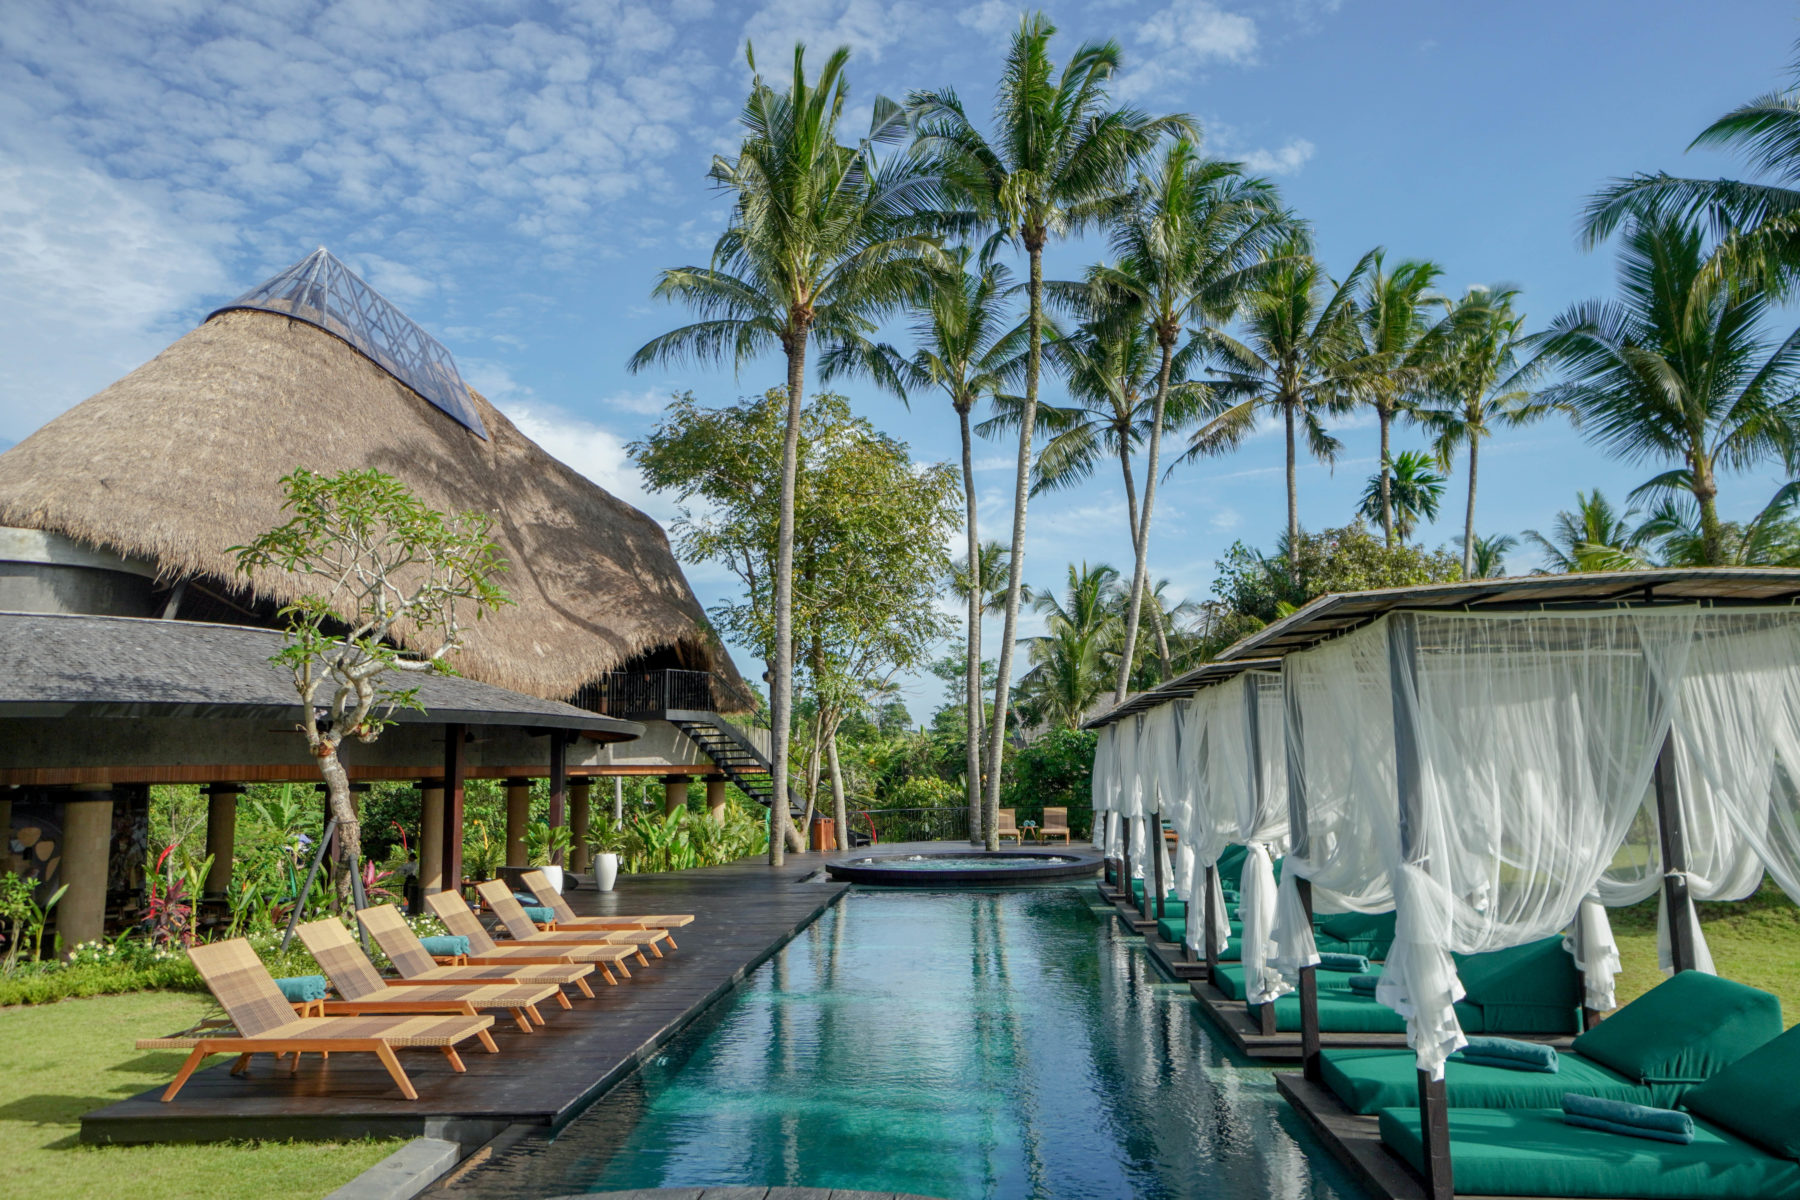 CHECK OUT OUR LATEST GLOBAL LUXURY TRAVEL SPOTLIGHT NEWSLETTER FEATURING INDONESIA